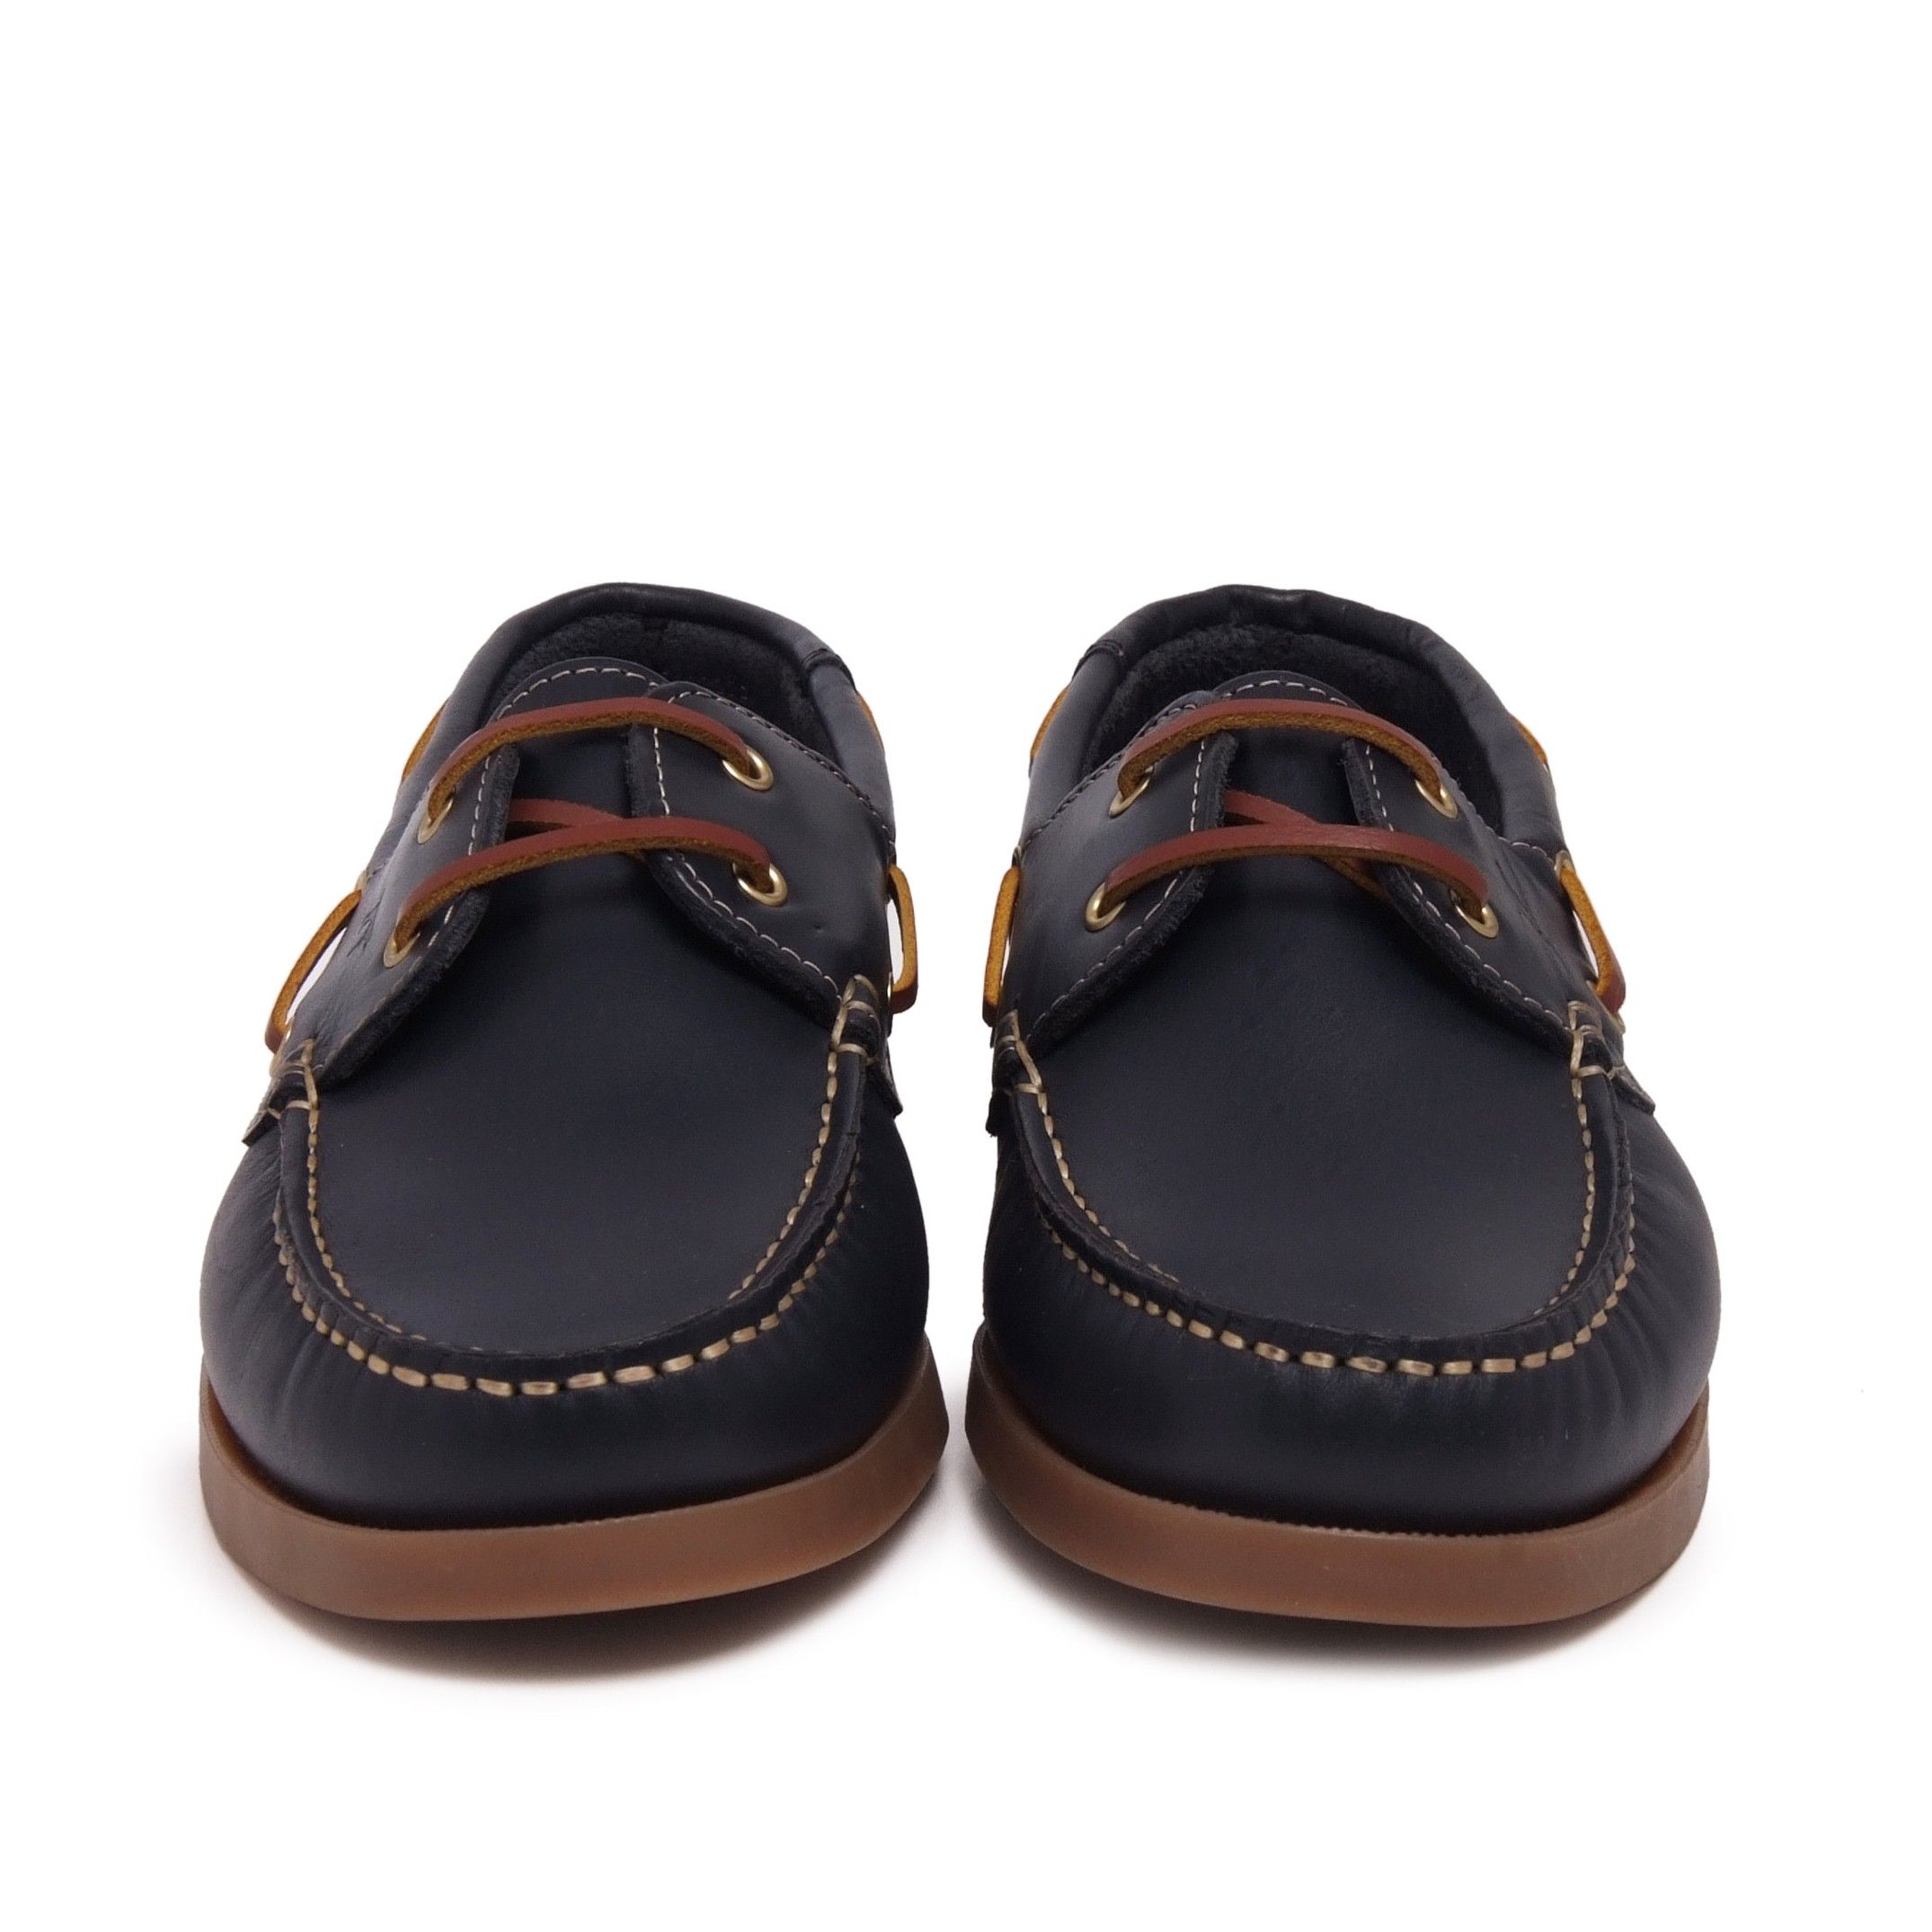 Lace up boat shoes. Upper: Oil leather. Inner and insole made of natural leather. Insole: leather.Sole: Non -skid rubber . MADE IN PORTUGAL.